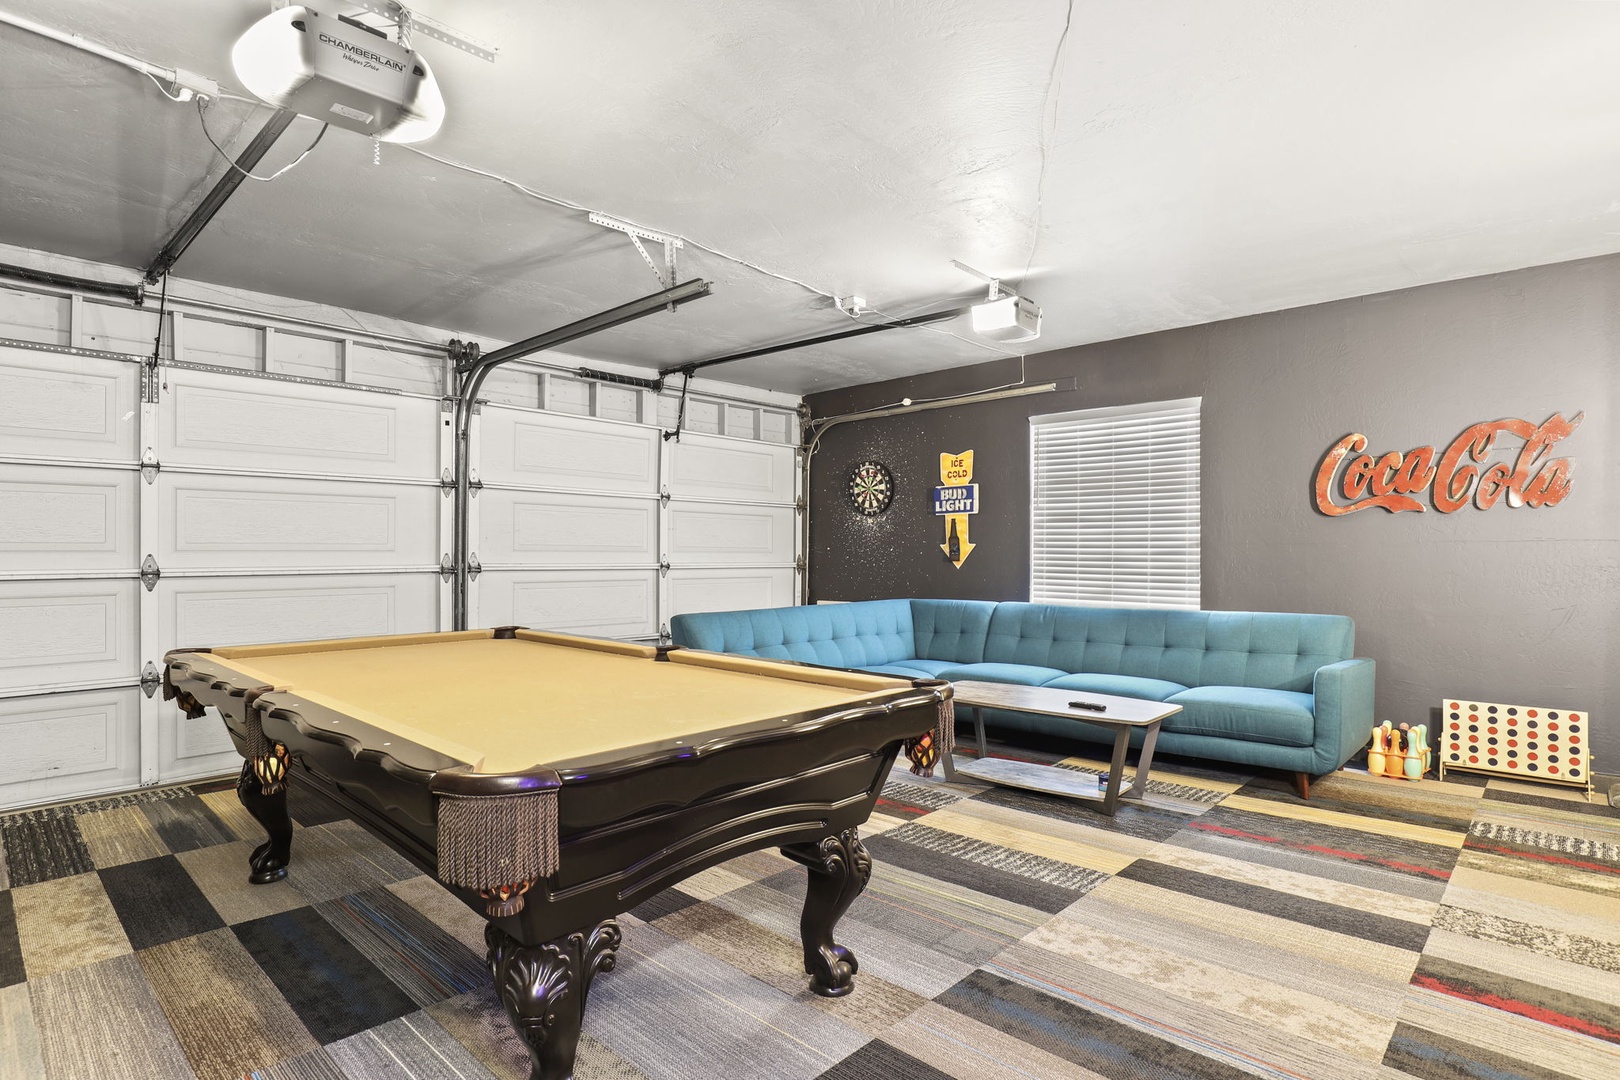 Temperature controlled game room with sofa sectional lounge, pool table, dart board, big screen smart tv.